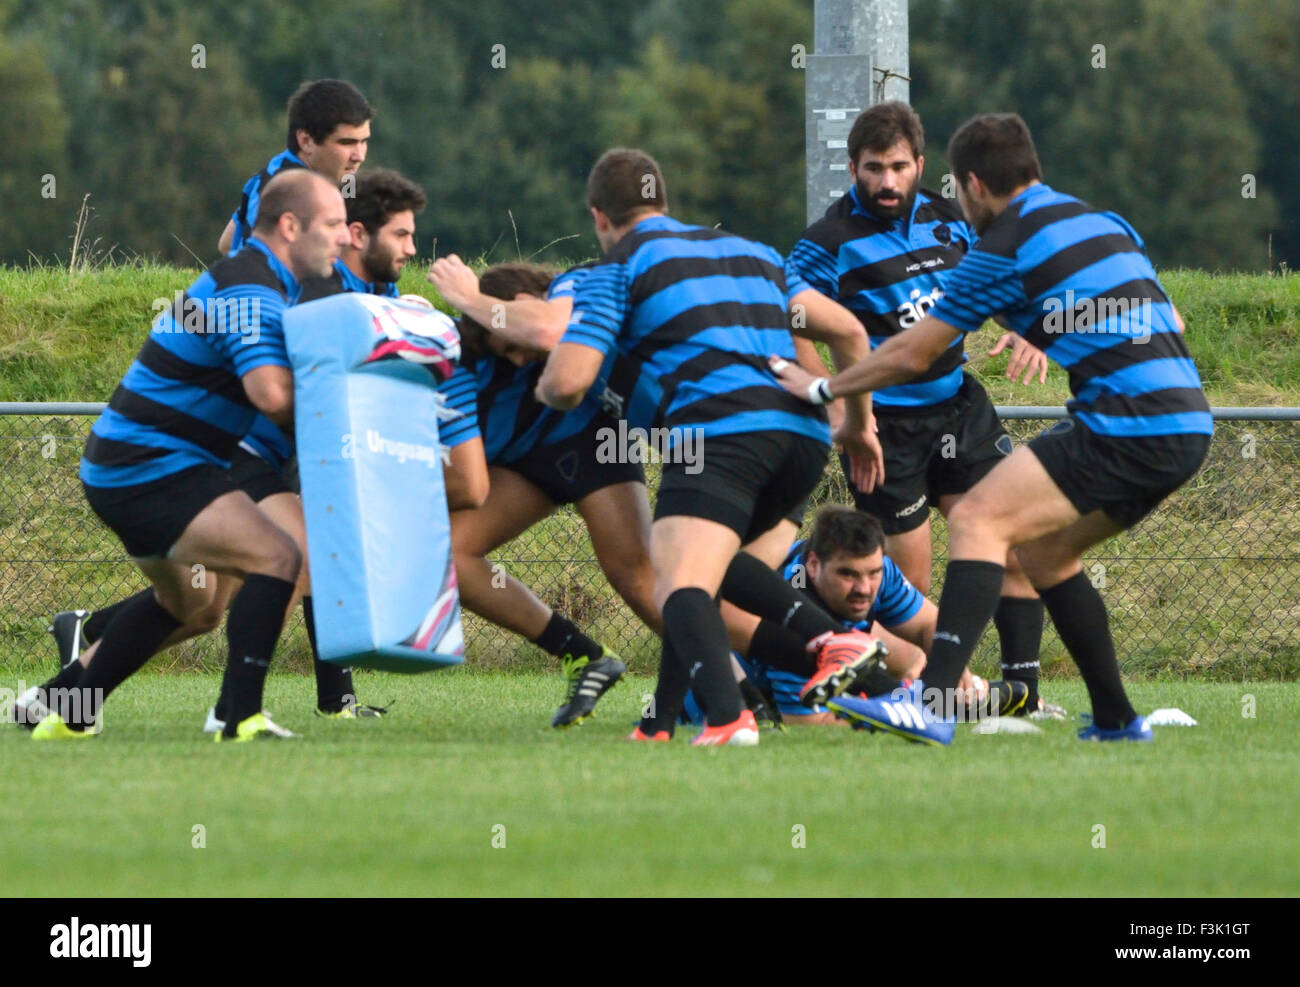 Manchester, UK. 8th October, 2015. The Uruguay squad train at Broughton Park Rugby Club in preparation for their match against England on 10th October with neither side able to qualify for the quarter-finals. Rugby World Cup - Uruguay Training Session Manchester UK Credit:  John Fryer/Alamy Live News Stock Photo